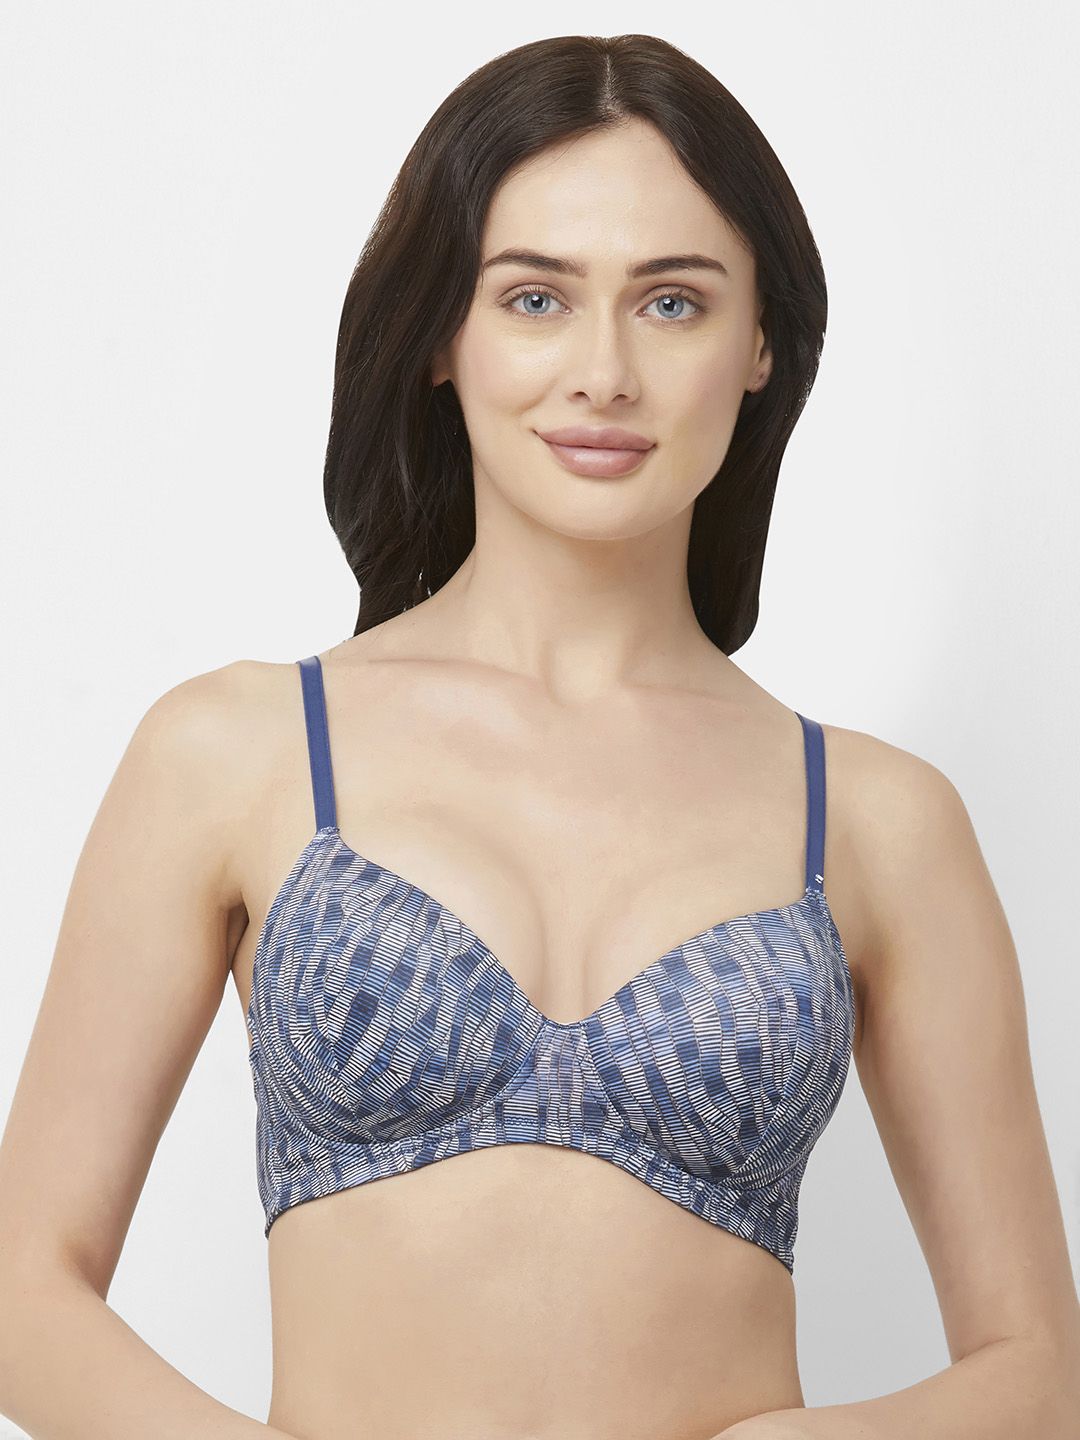 Soie Blue Printed Non-Wired Lightly Padded Semi-Covered T-shirt Bra CB-117PR-3